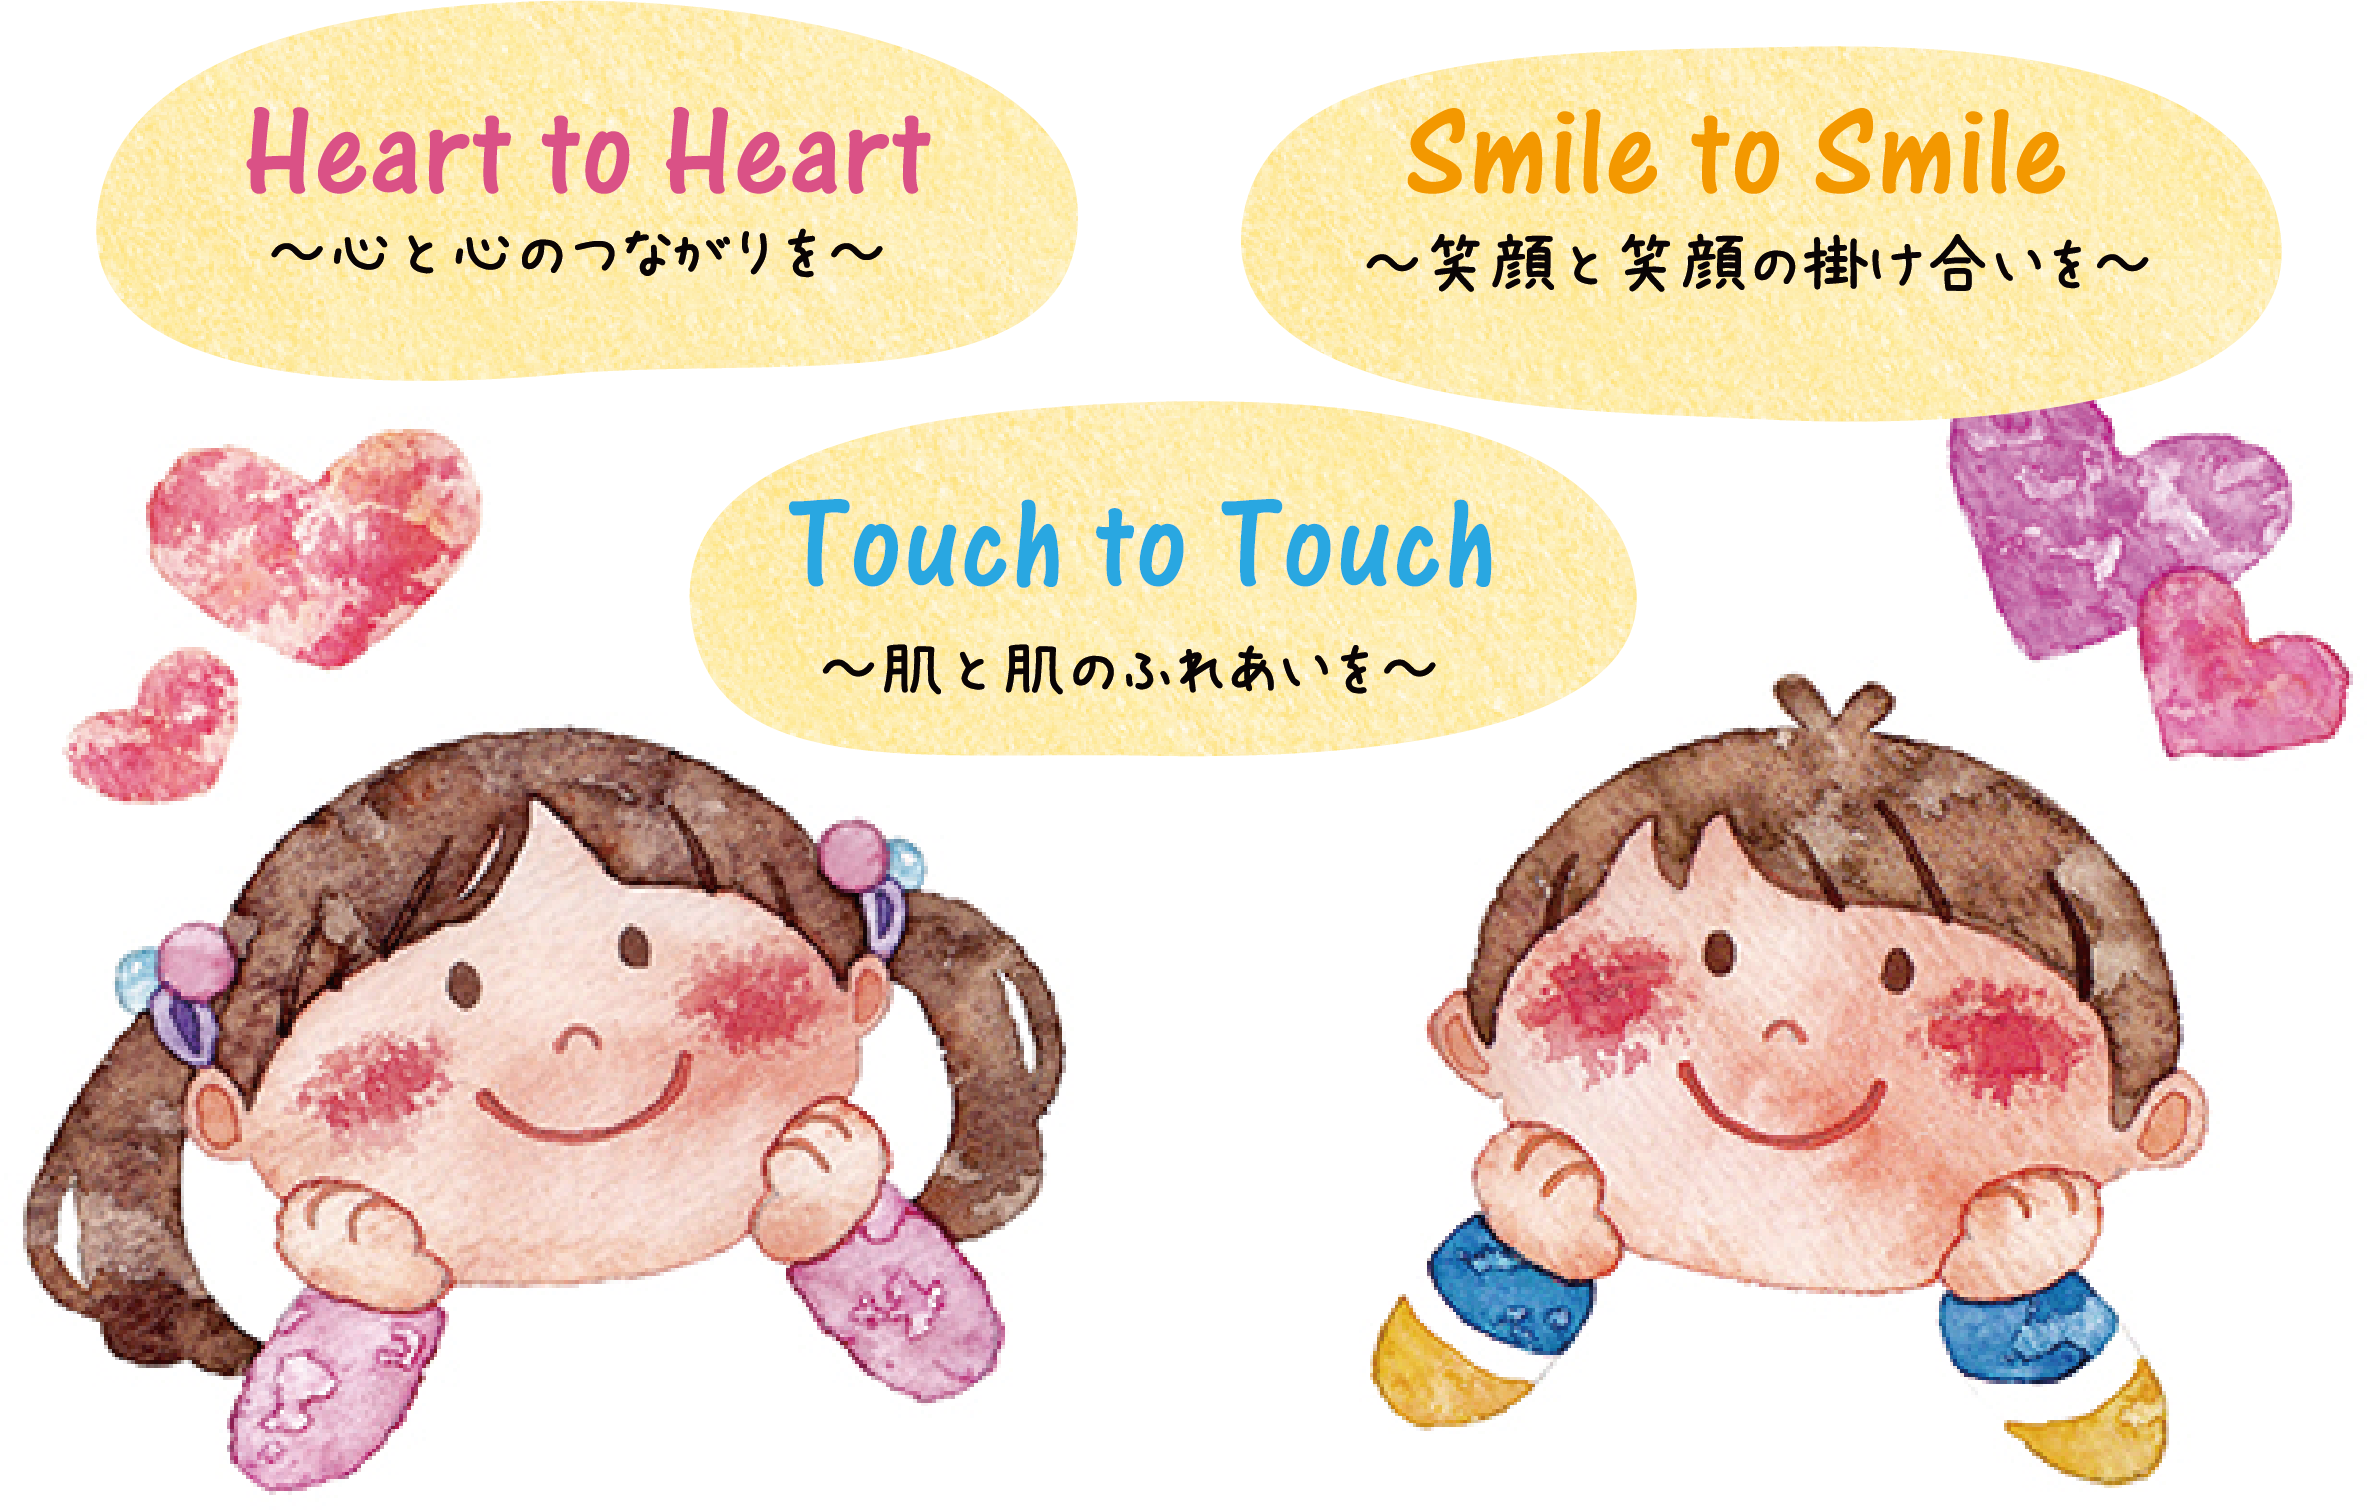 Heart to Heart～心と心のつながりを～ Smile to Smile～笑顔と笑顔の掛け合いを～ Touch to Touch～肌と肌のふれあいを～